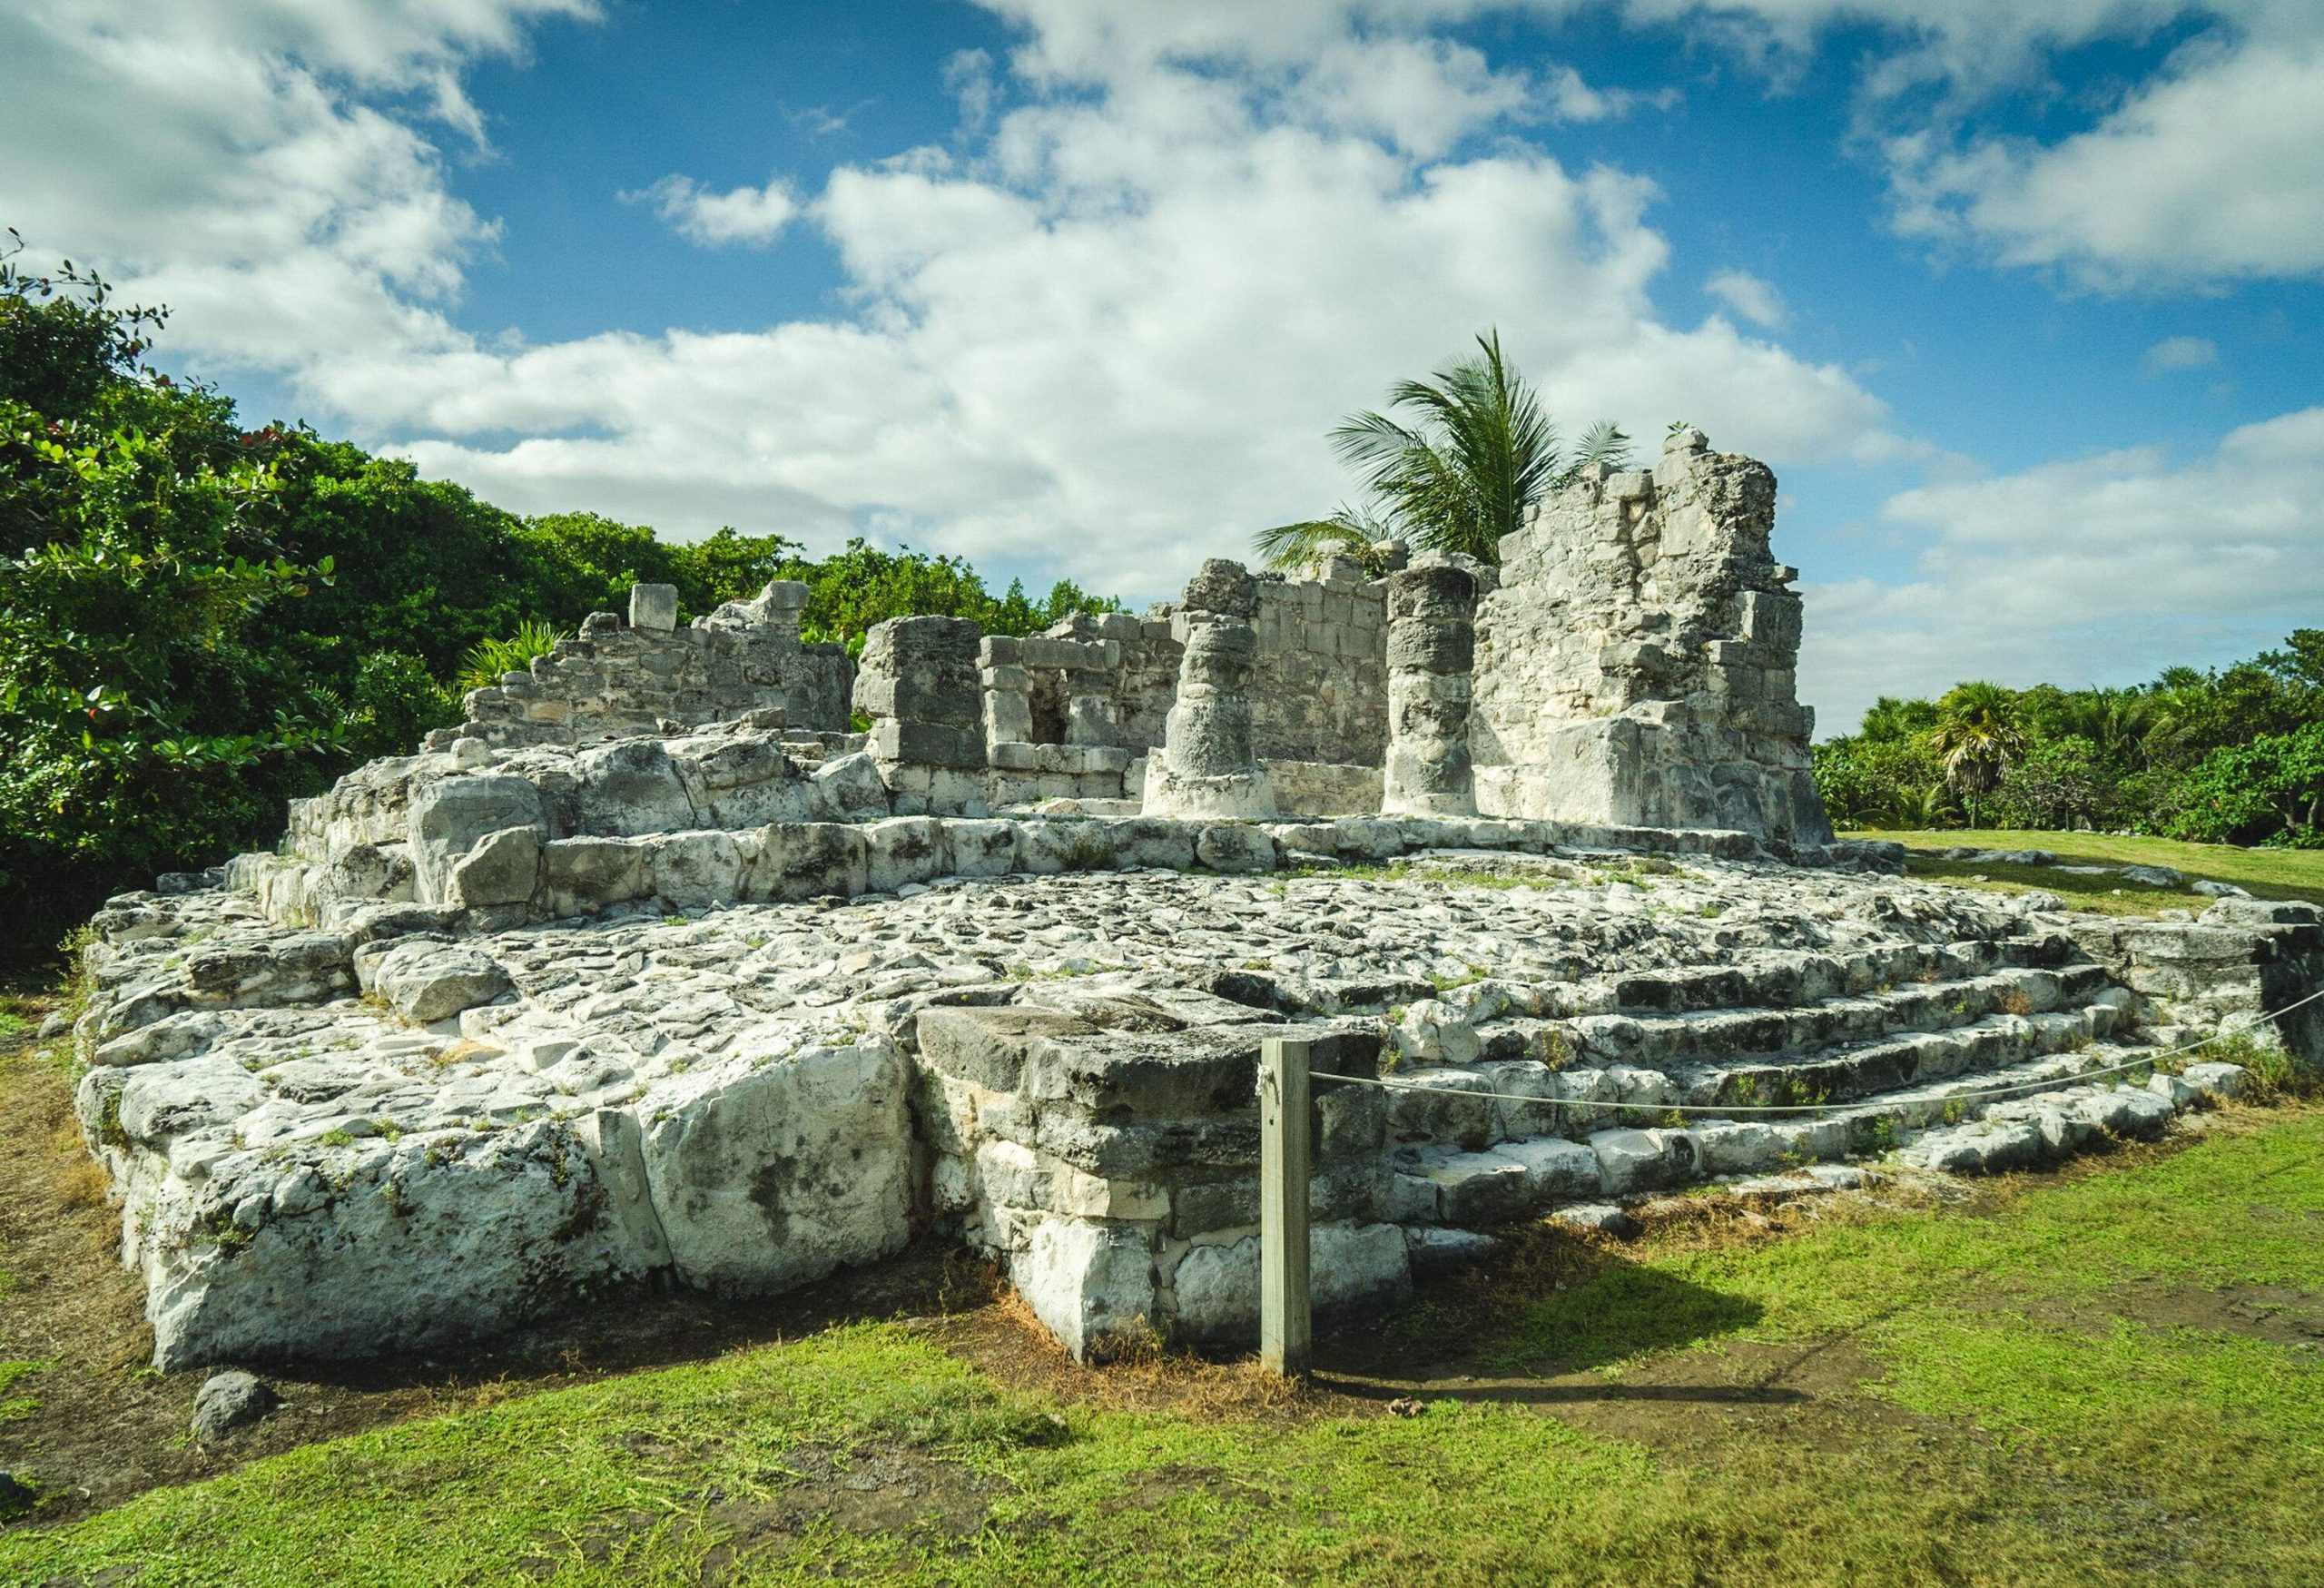 A striking Mayan ruin stands tall, showcasing a remarkable stone structure that exemplifies the architectural and cultural legacy of the ancient Mayan civilization.